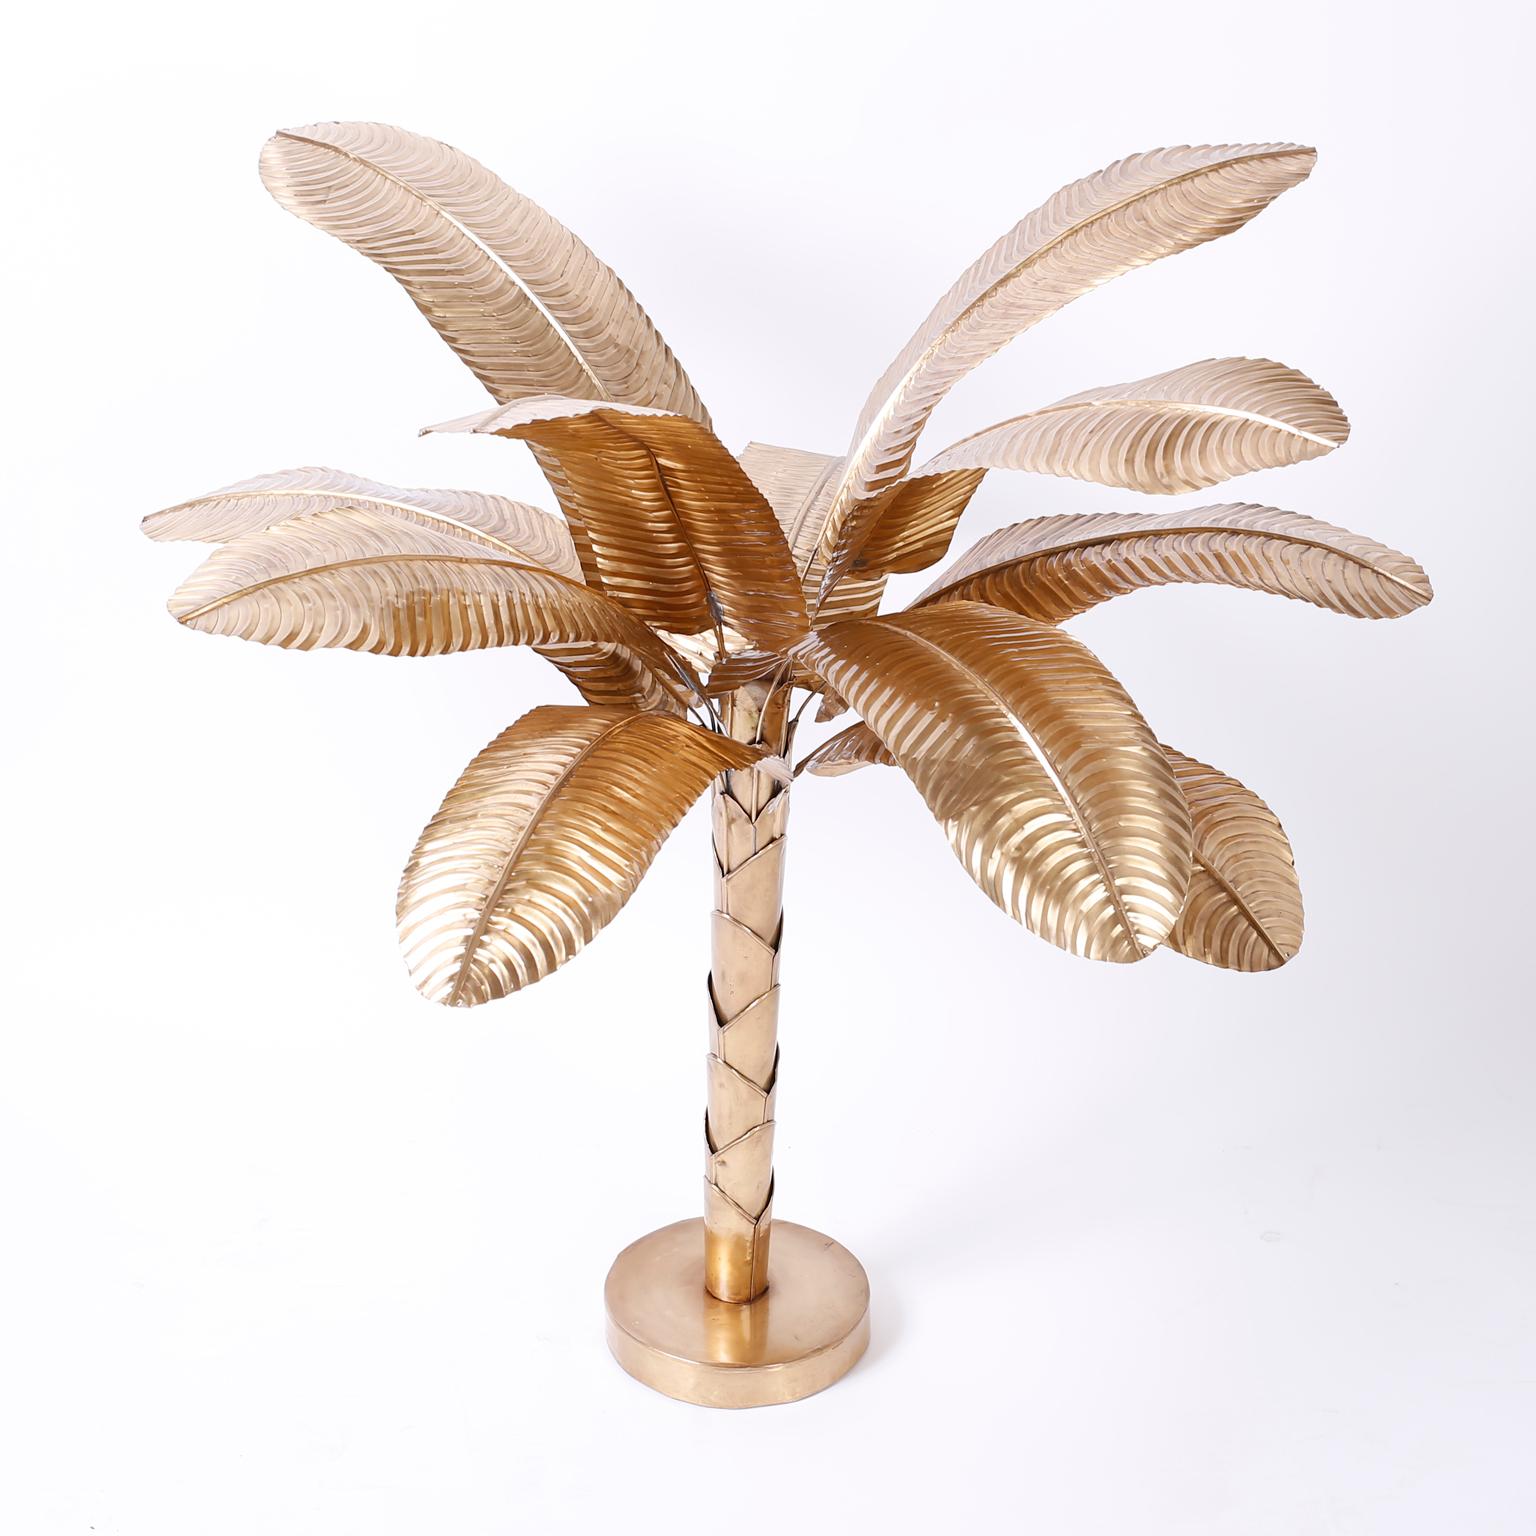 Striking midcentury stylized brass tabletop palm or banana tree with a tropical ambiance suitable for traditional or modern interiors. Hand polished and lacquered for easy care.